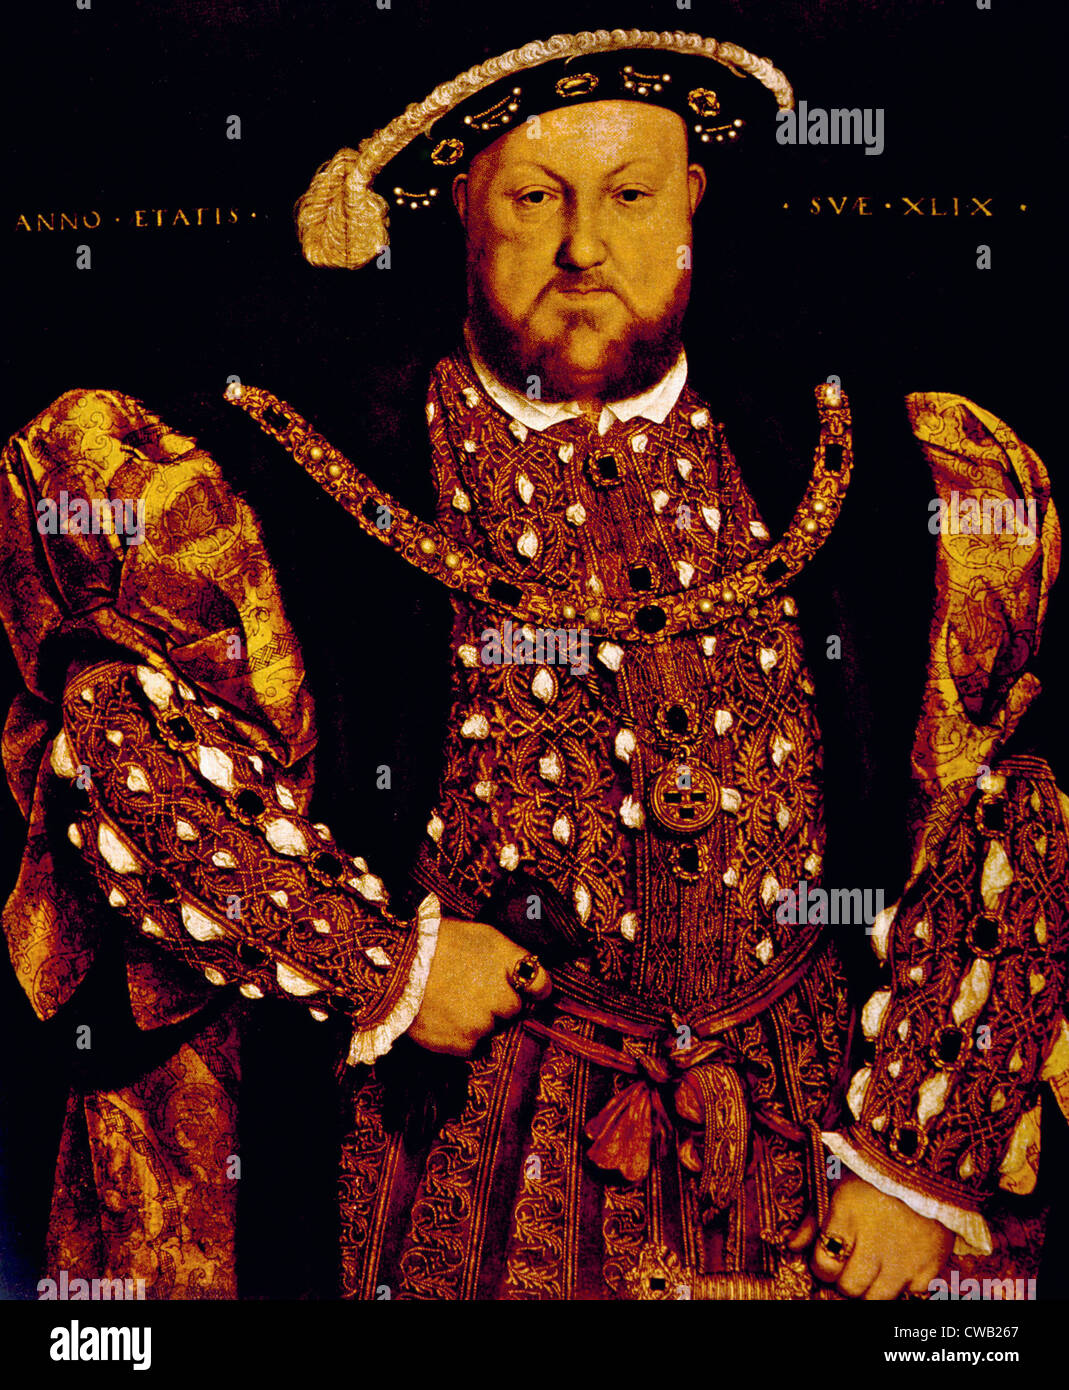 King Henry VIII (1491-1547), King of England, and Ireland, from 1509 until his death. Portrait by Hans Holbein the Younger, Stock Photo